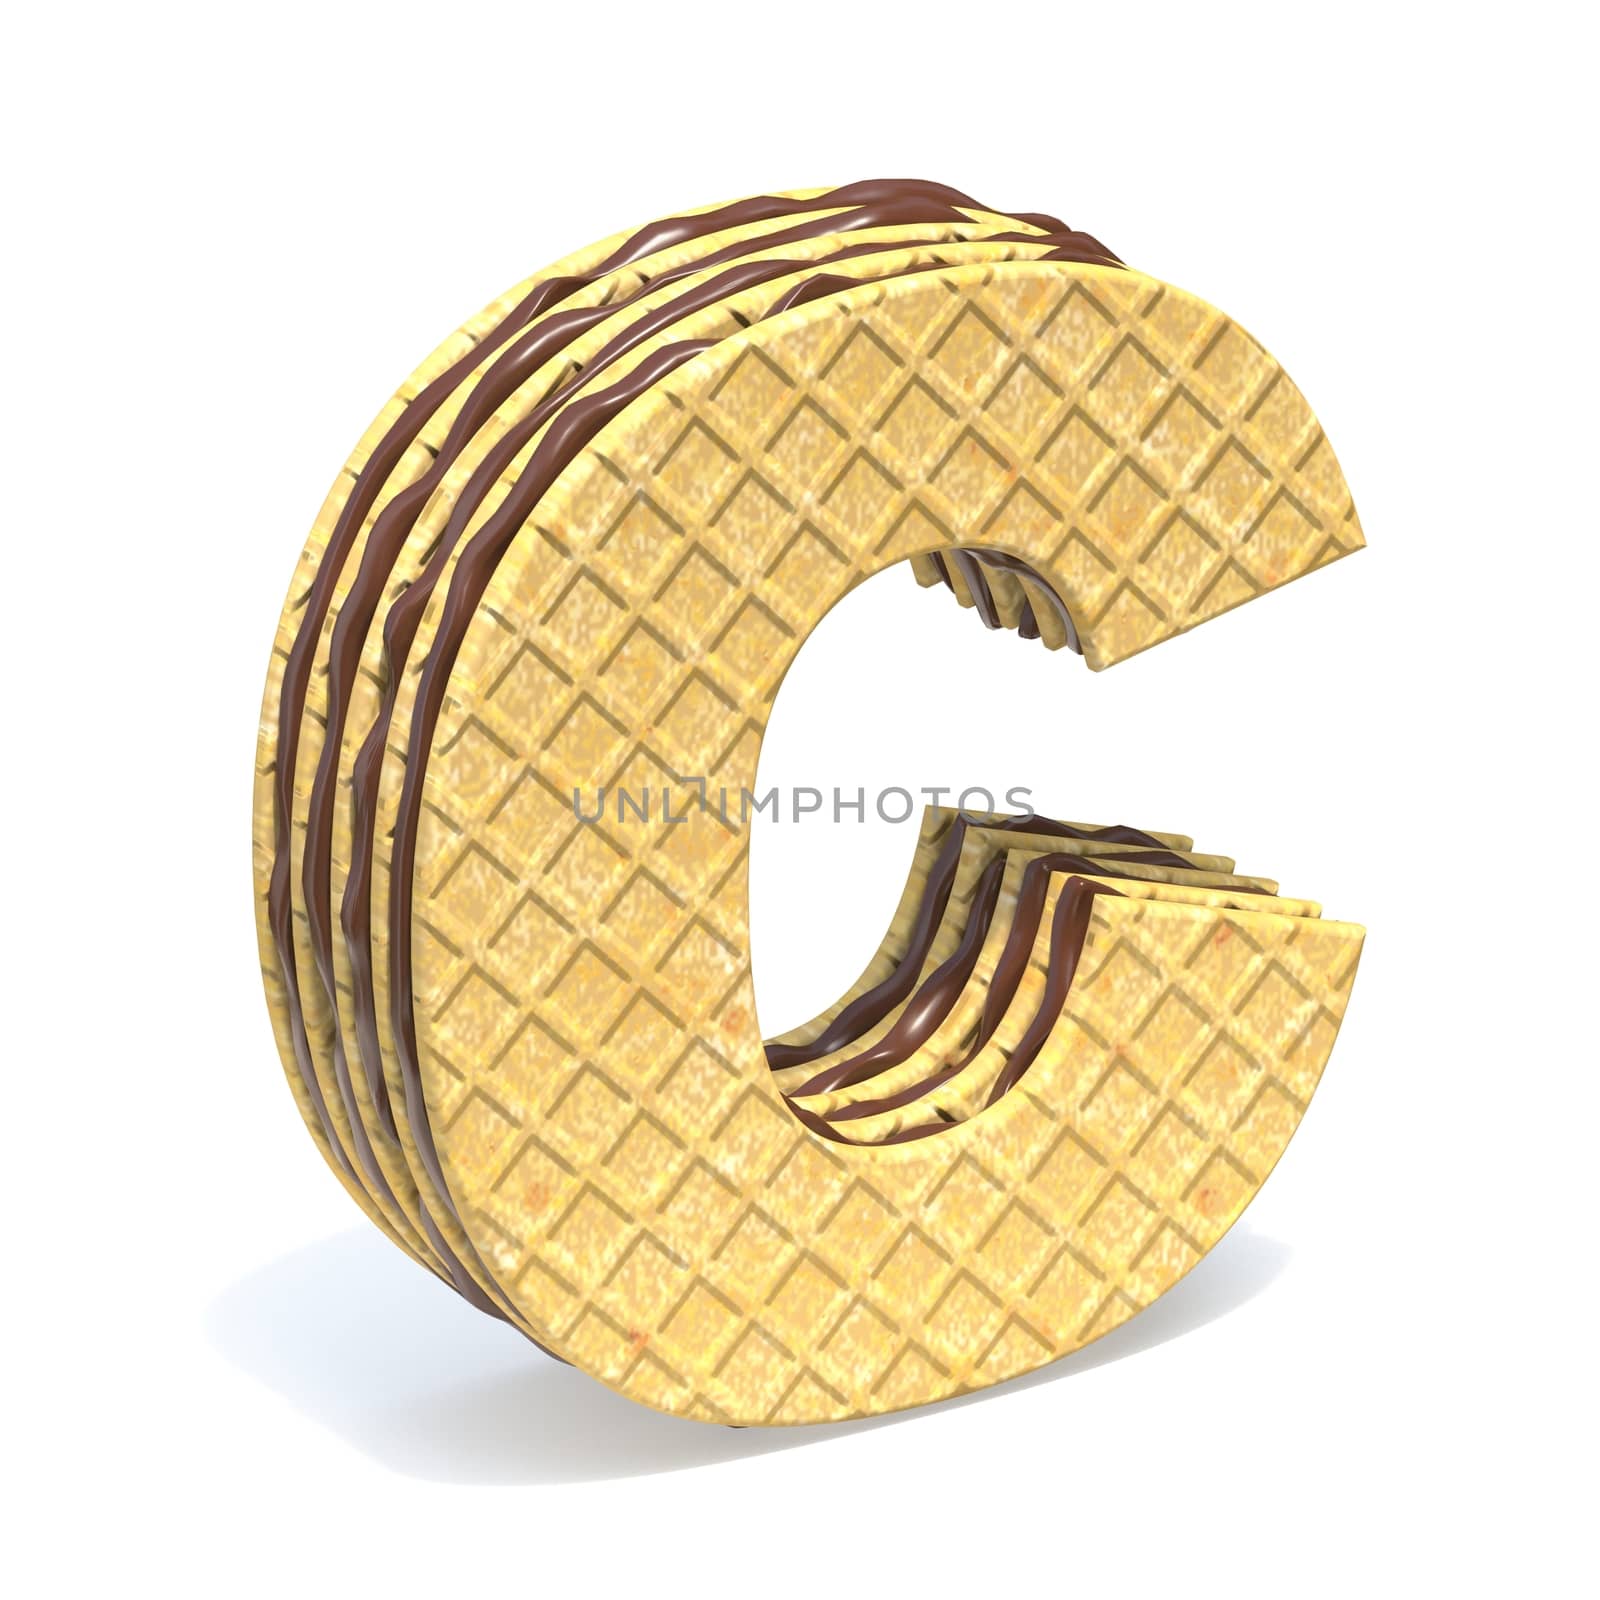 Waffles font with chocolate cream filling Letter C 3D rendering illustration isolated on white background